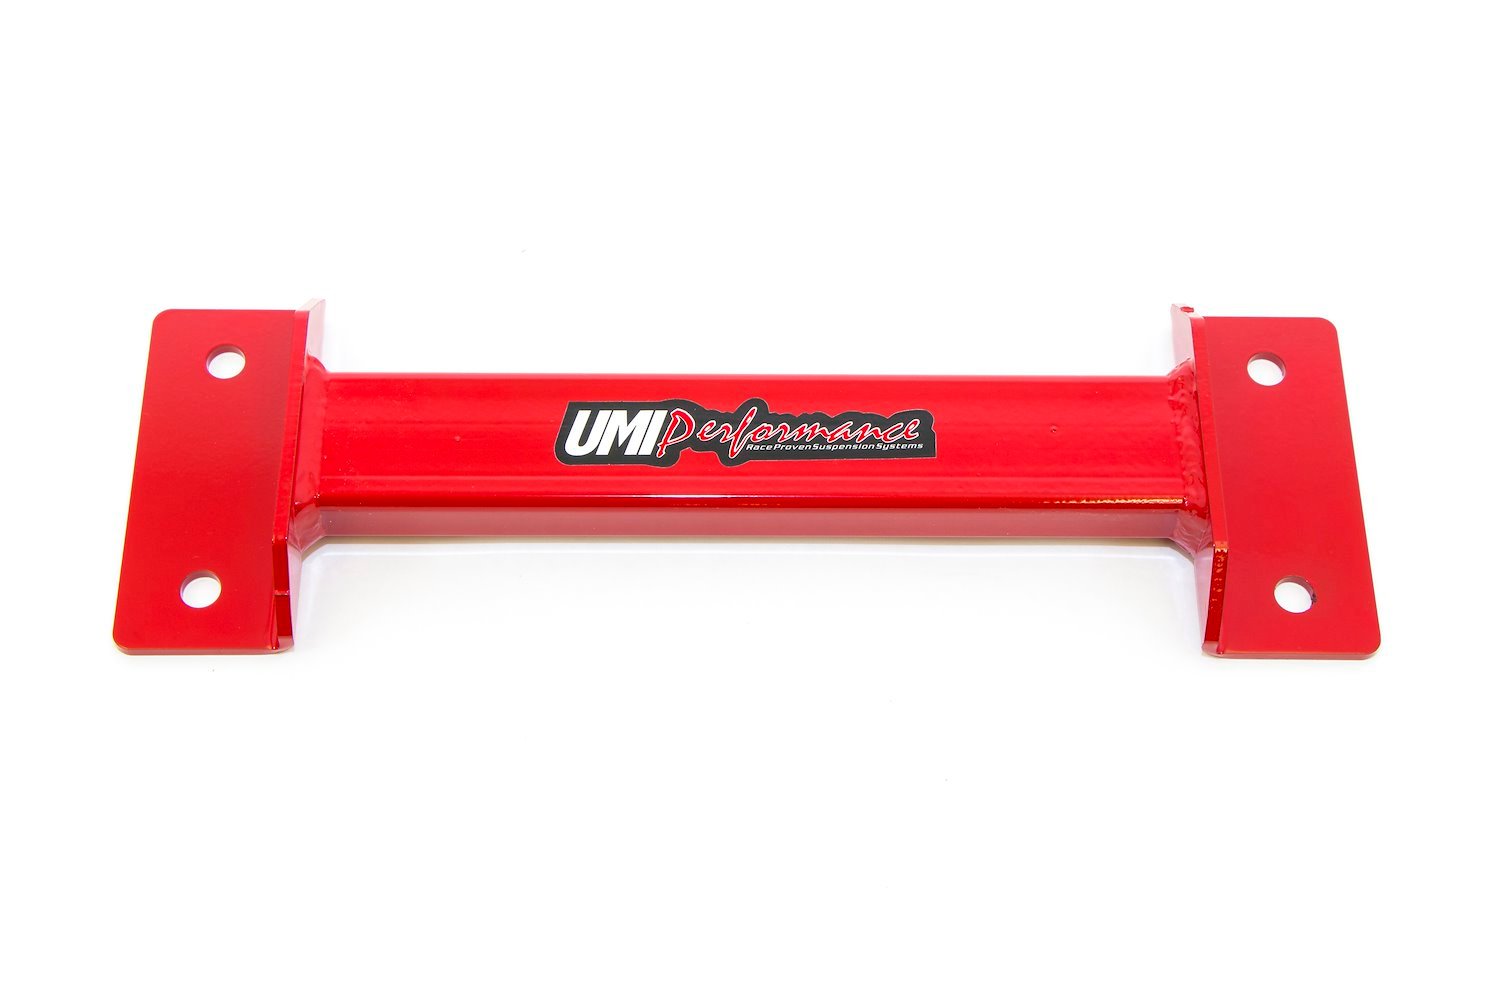 The UMI heavy duty tunnel brace reinforces the tunnel area and reduces chassis flex by replacing the